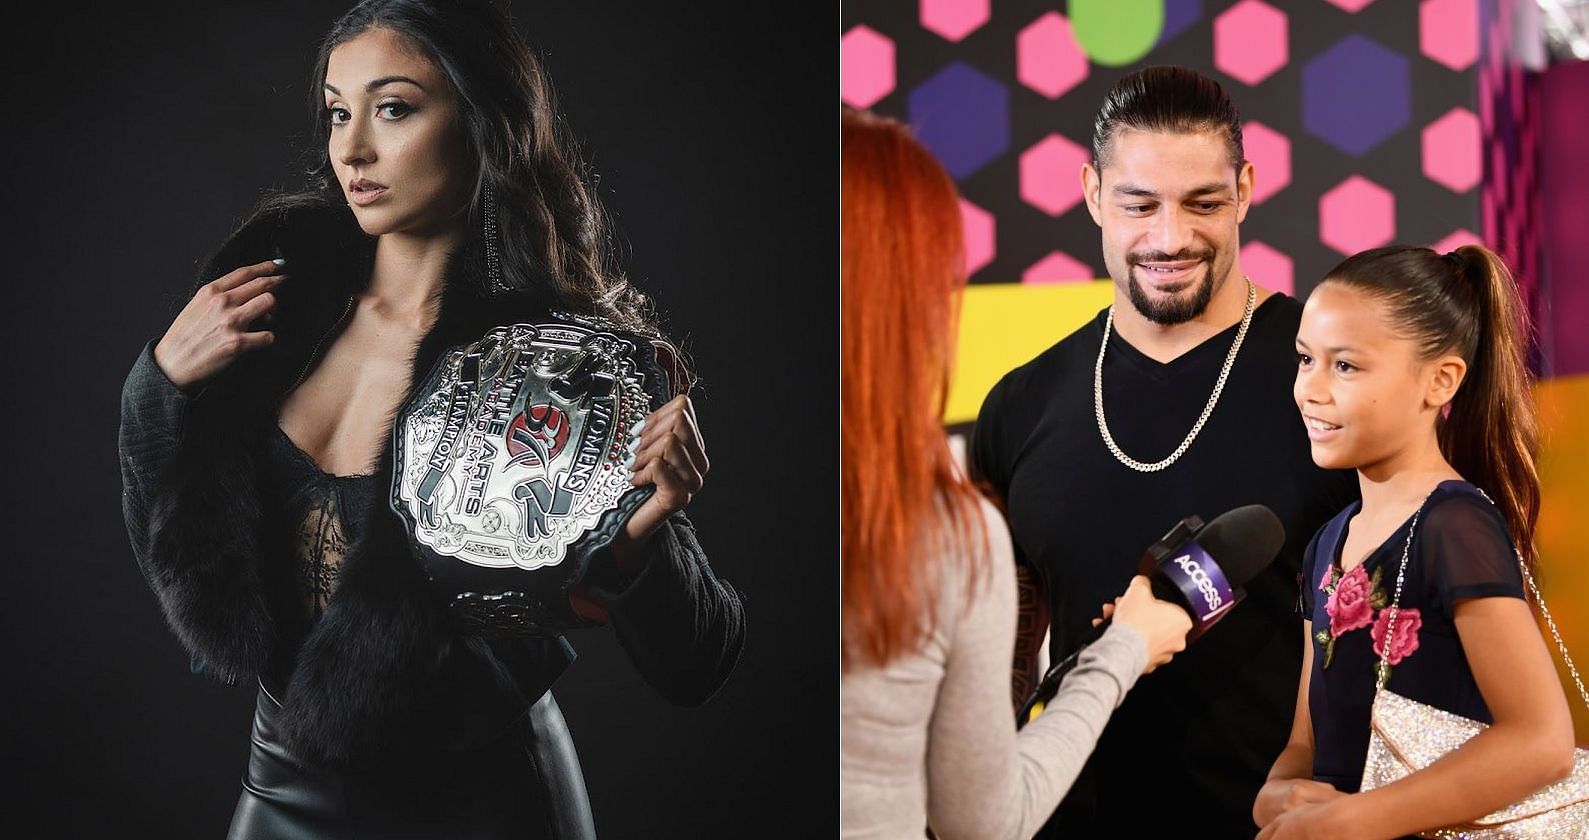 Several WWE Superstars have shared their views on allowing their children into the business